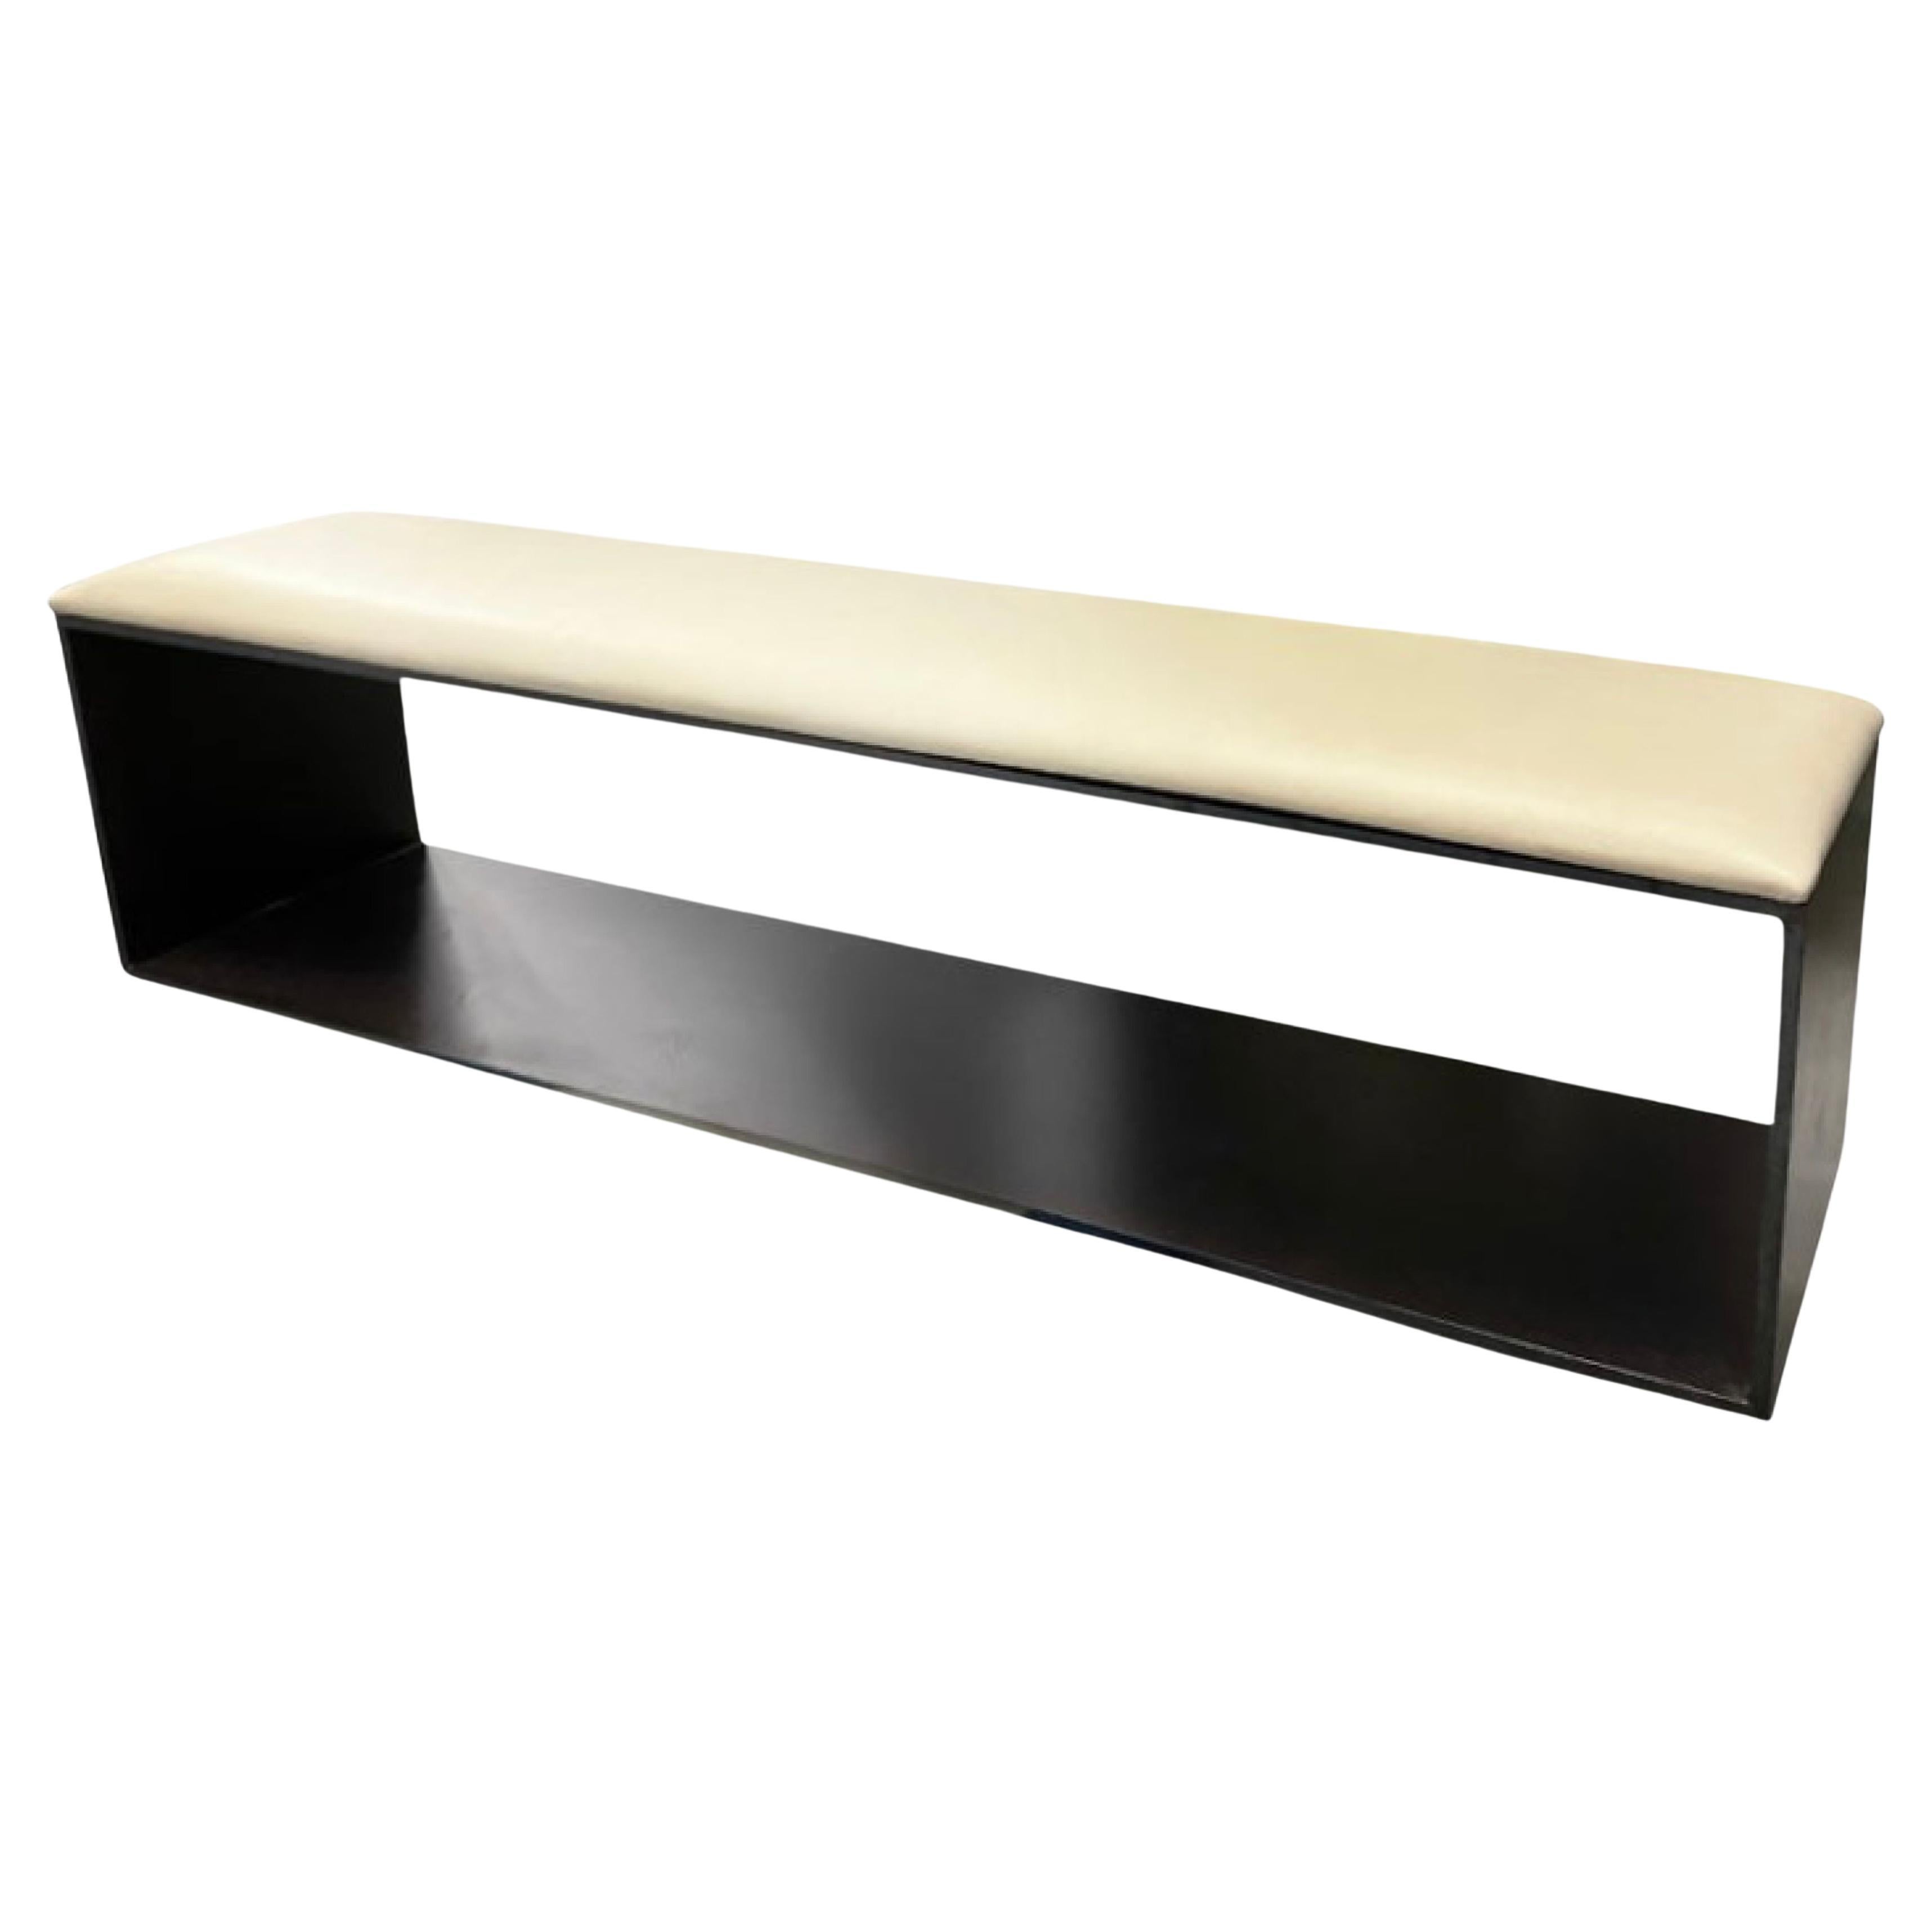 Christian Liaigre for Holly Hunt Leather and Bronze Bench, Minimal Modern France For Sale